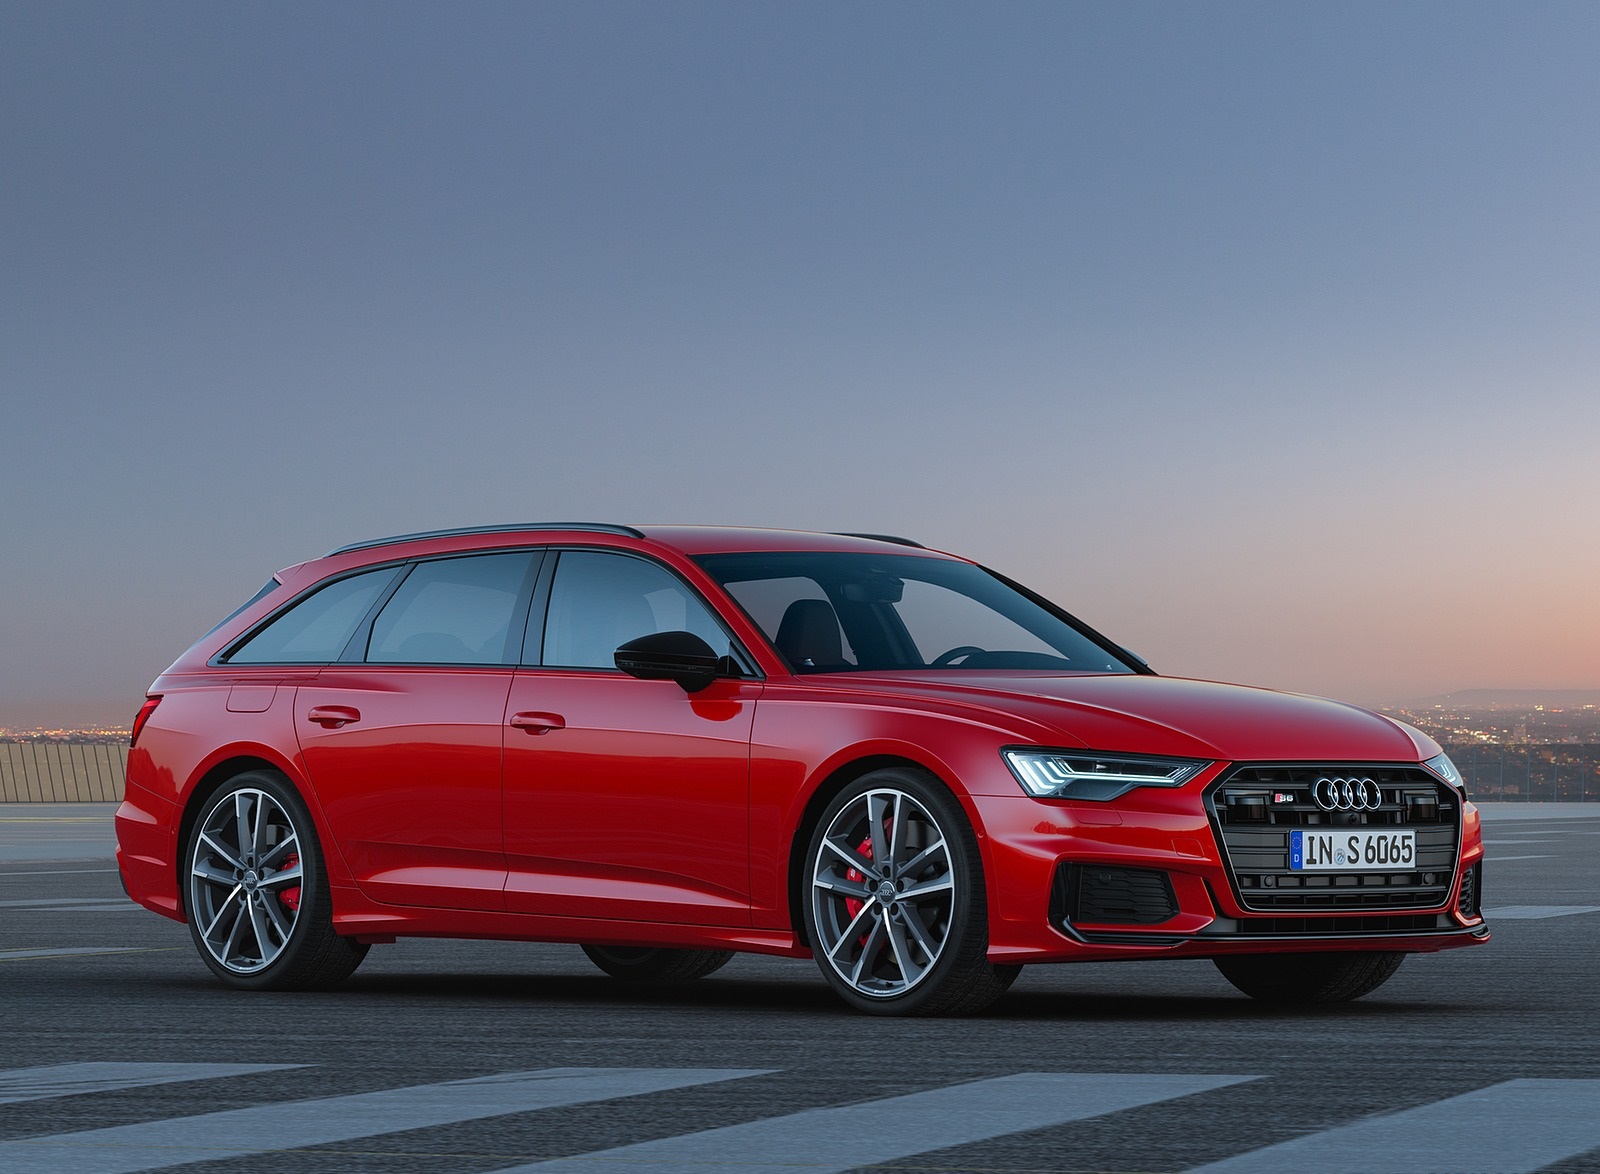 2020 Audi S6 Avant TDI (Color: Tango Red) Front Three-Quarter Wallpapers  #30 of 60